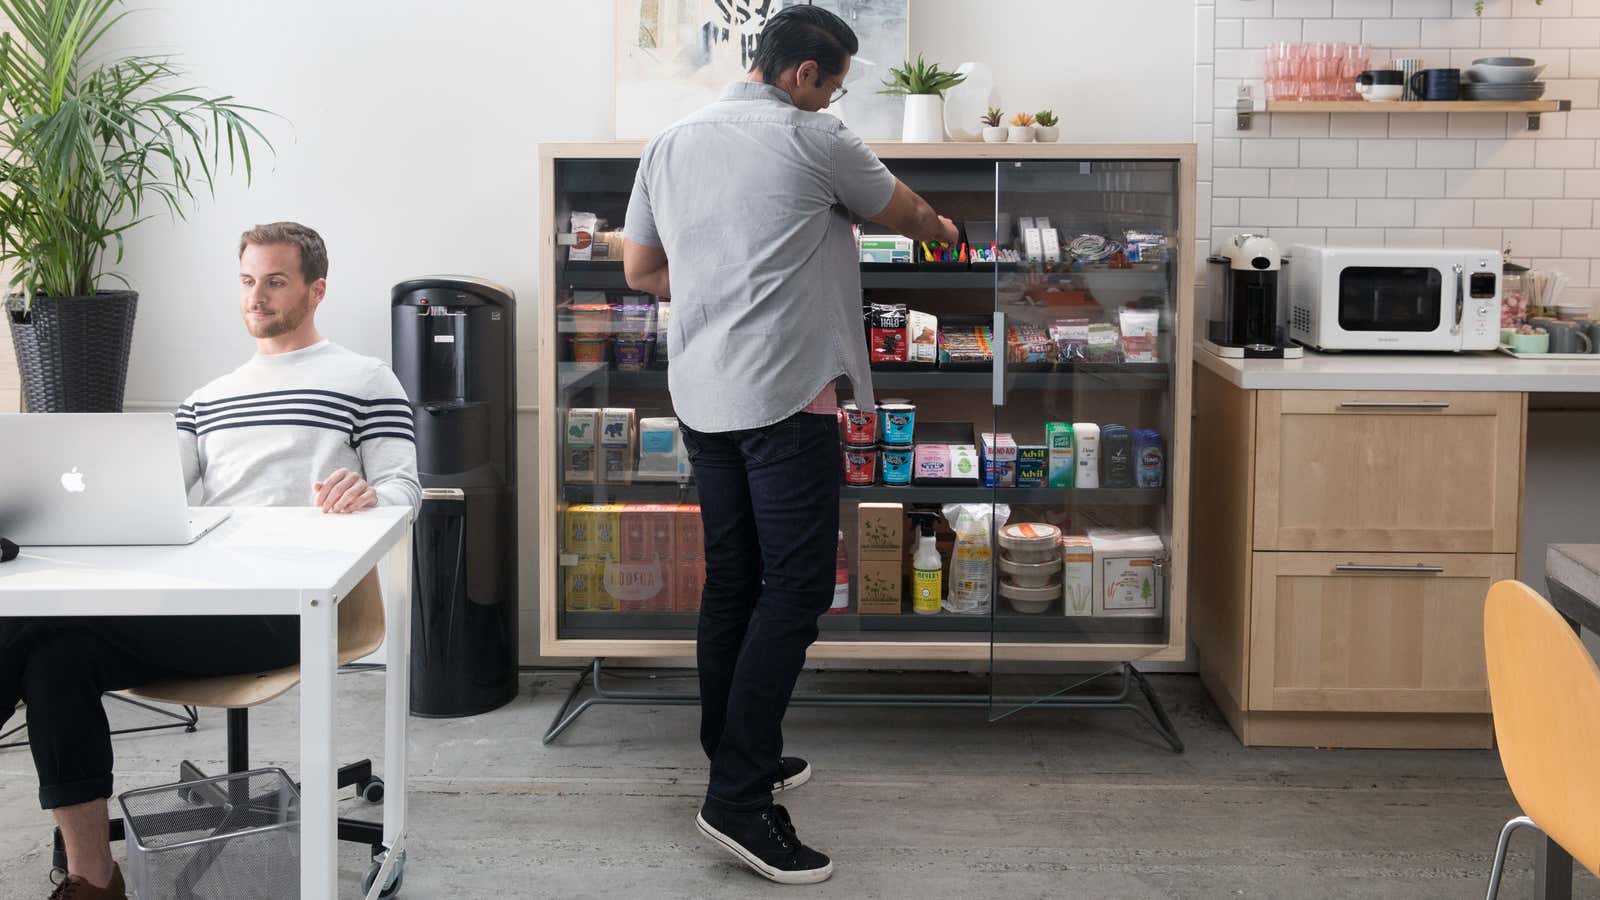 The future of retail is tiny stores everywhere that sell exactly what you need